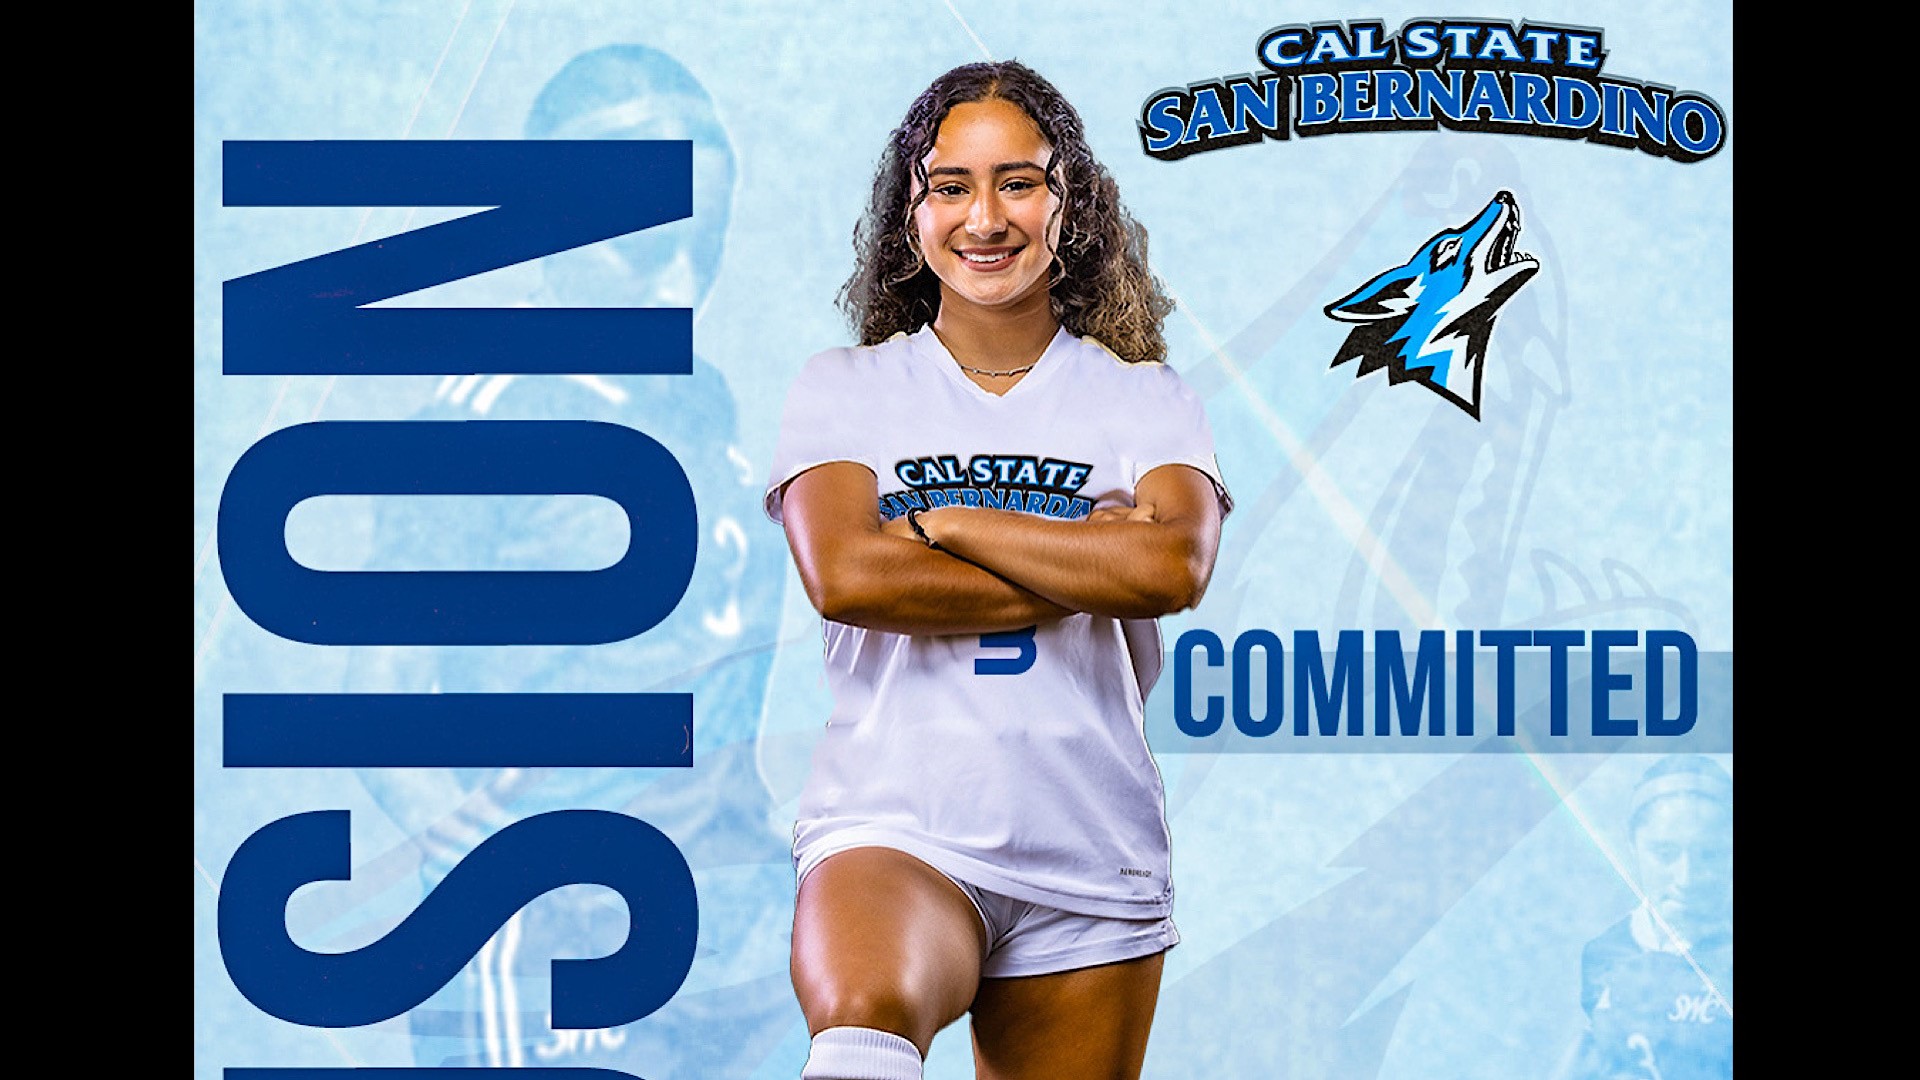 Our very own ILUSION DURON commits to Cal State San Bernardino